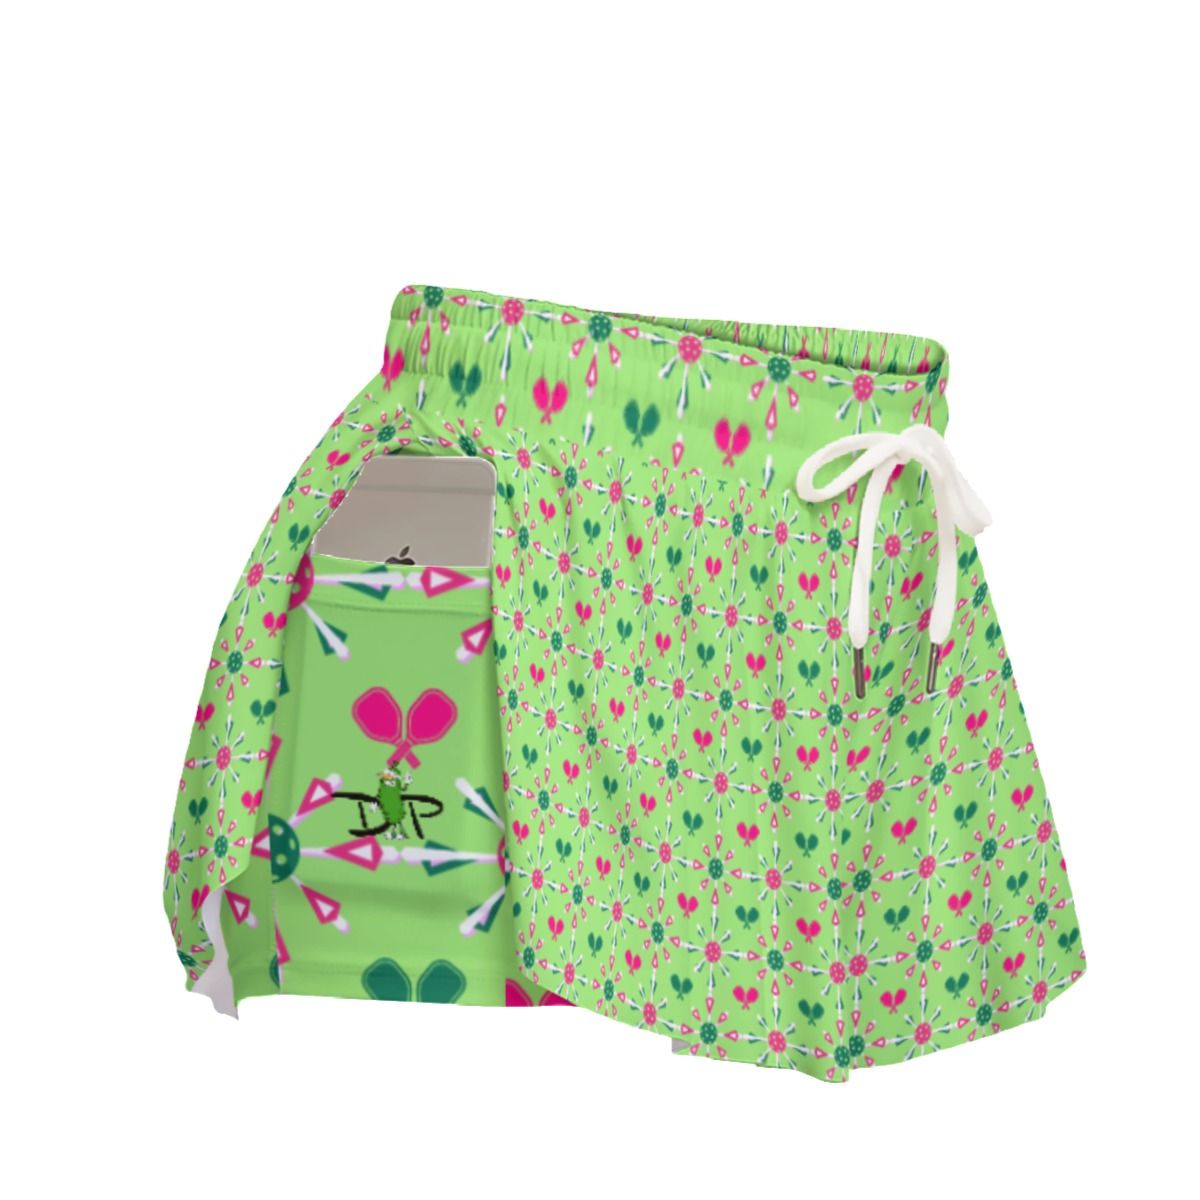 Penny - Mini Paddles/Balls Green - Pickleball Women's Sport Culottes with Pockets by Dizzy Pickle